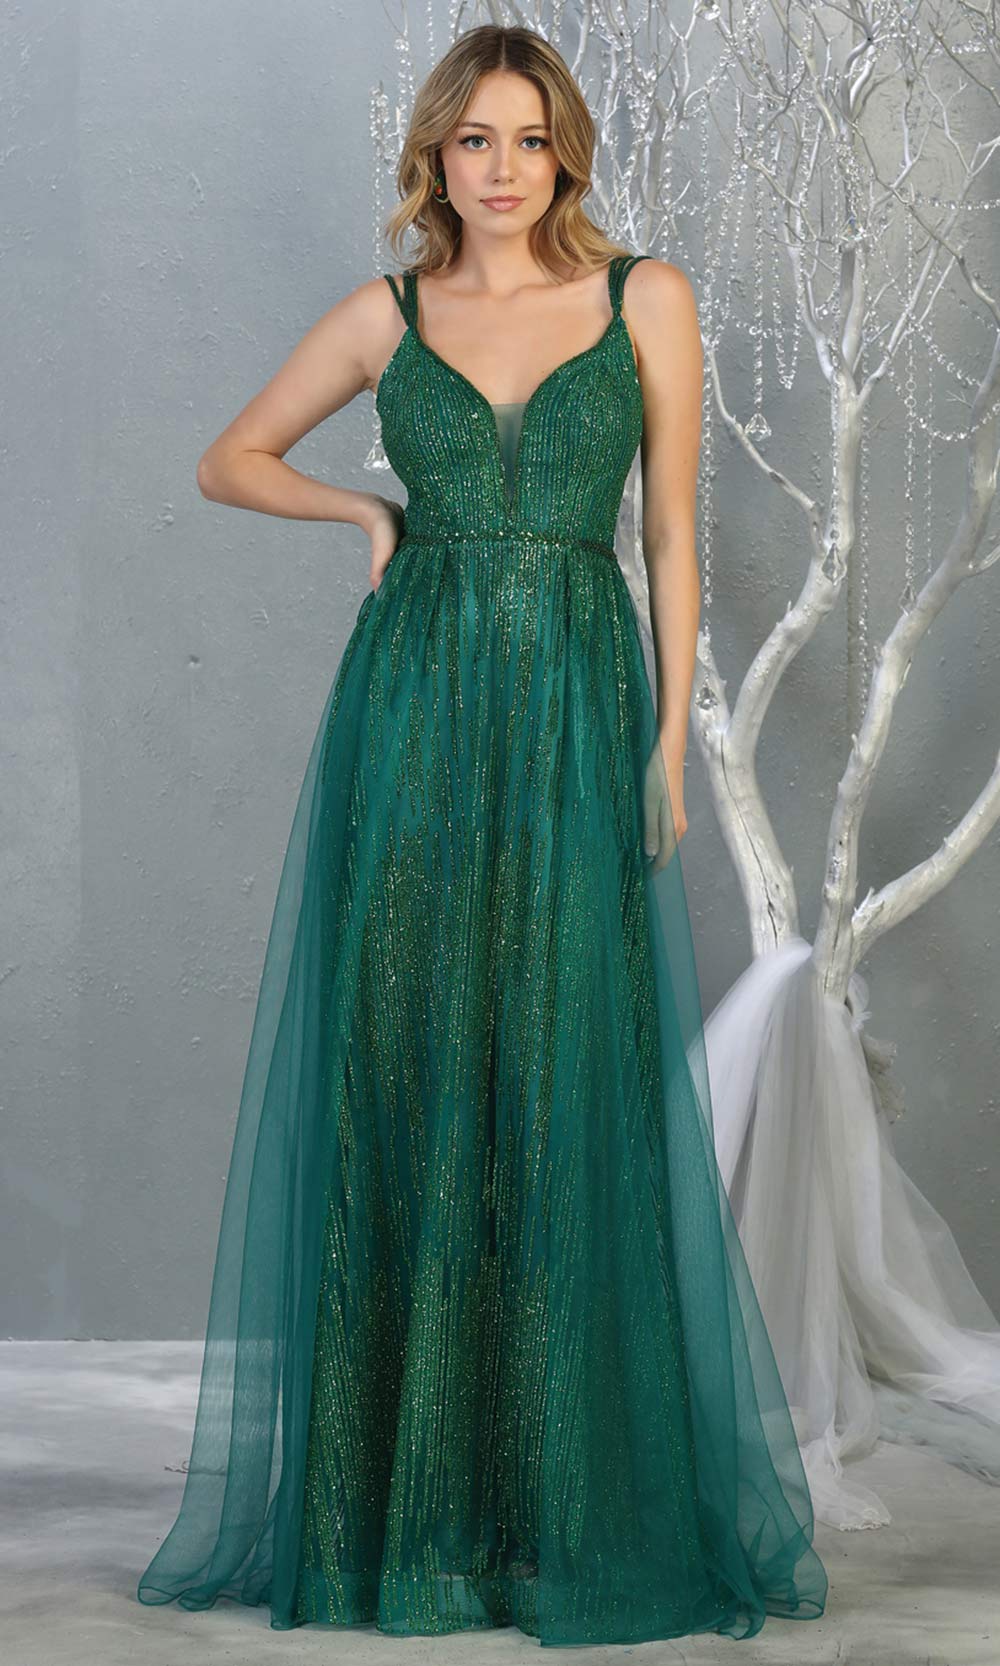 Mayqueen MQ1735 long sequin beaded  hunter green evening dress w/ straps & skirt overlay. This full length dark green gown is perfect for enagagement/e-shoot dress, wedding reception dress, indowestern gown, formal evening party dress.Plus sizes avail.jpg